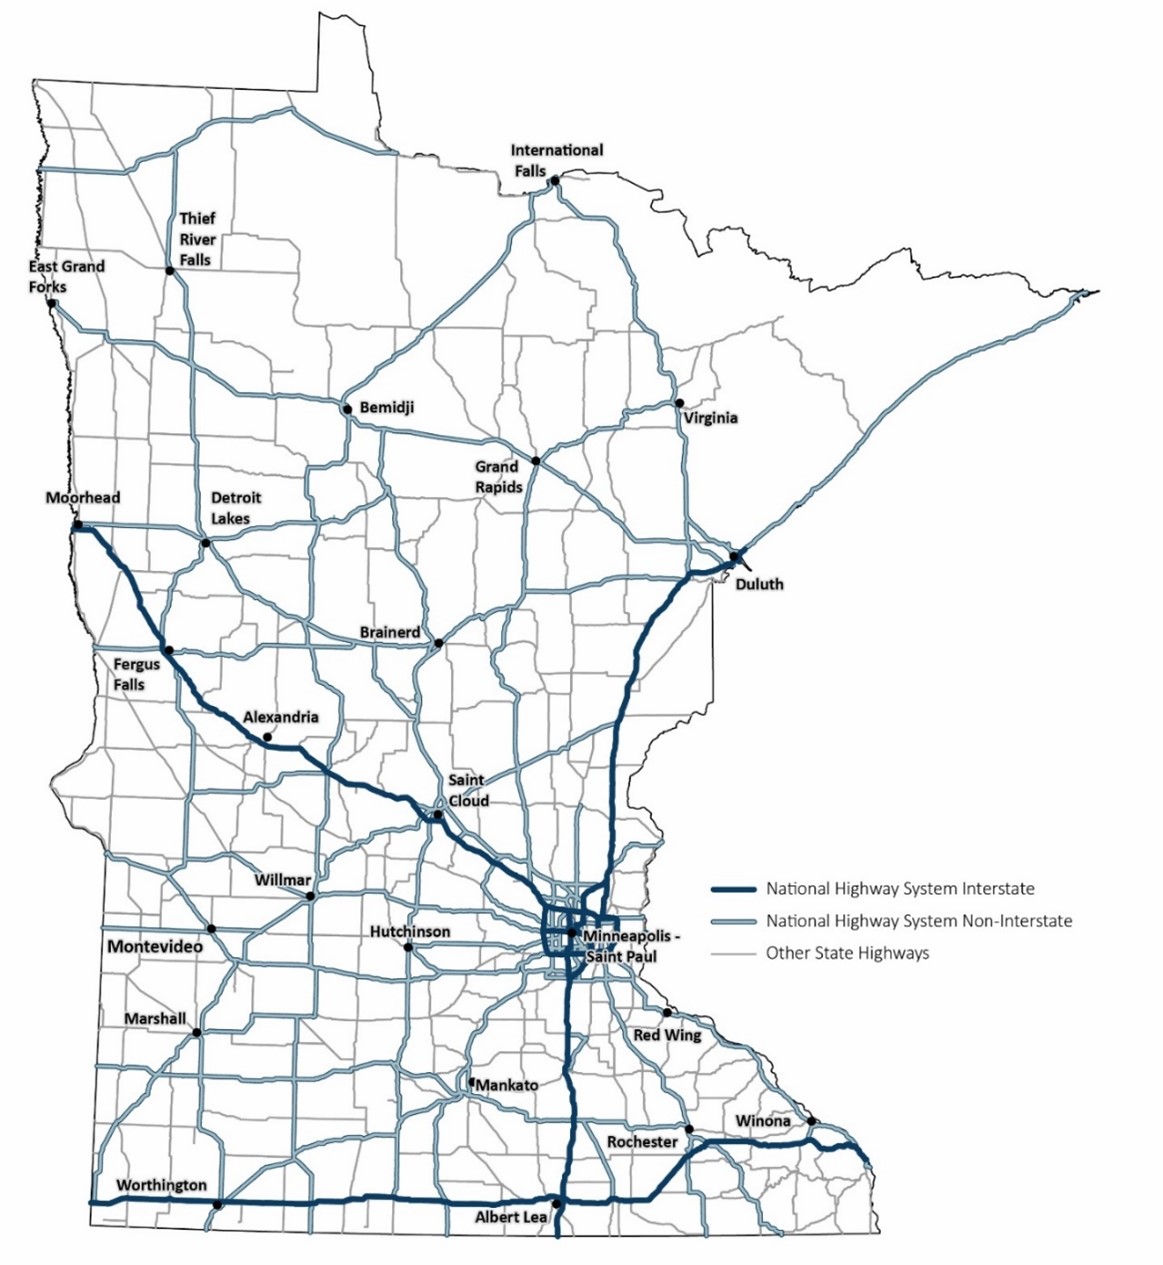 Minnesota map that shows existing state highway network. This includes the National Highway System Interstate, National Highway System Non-Interstate and other State Highways across the state. 